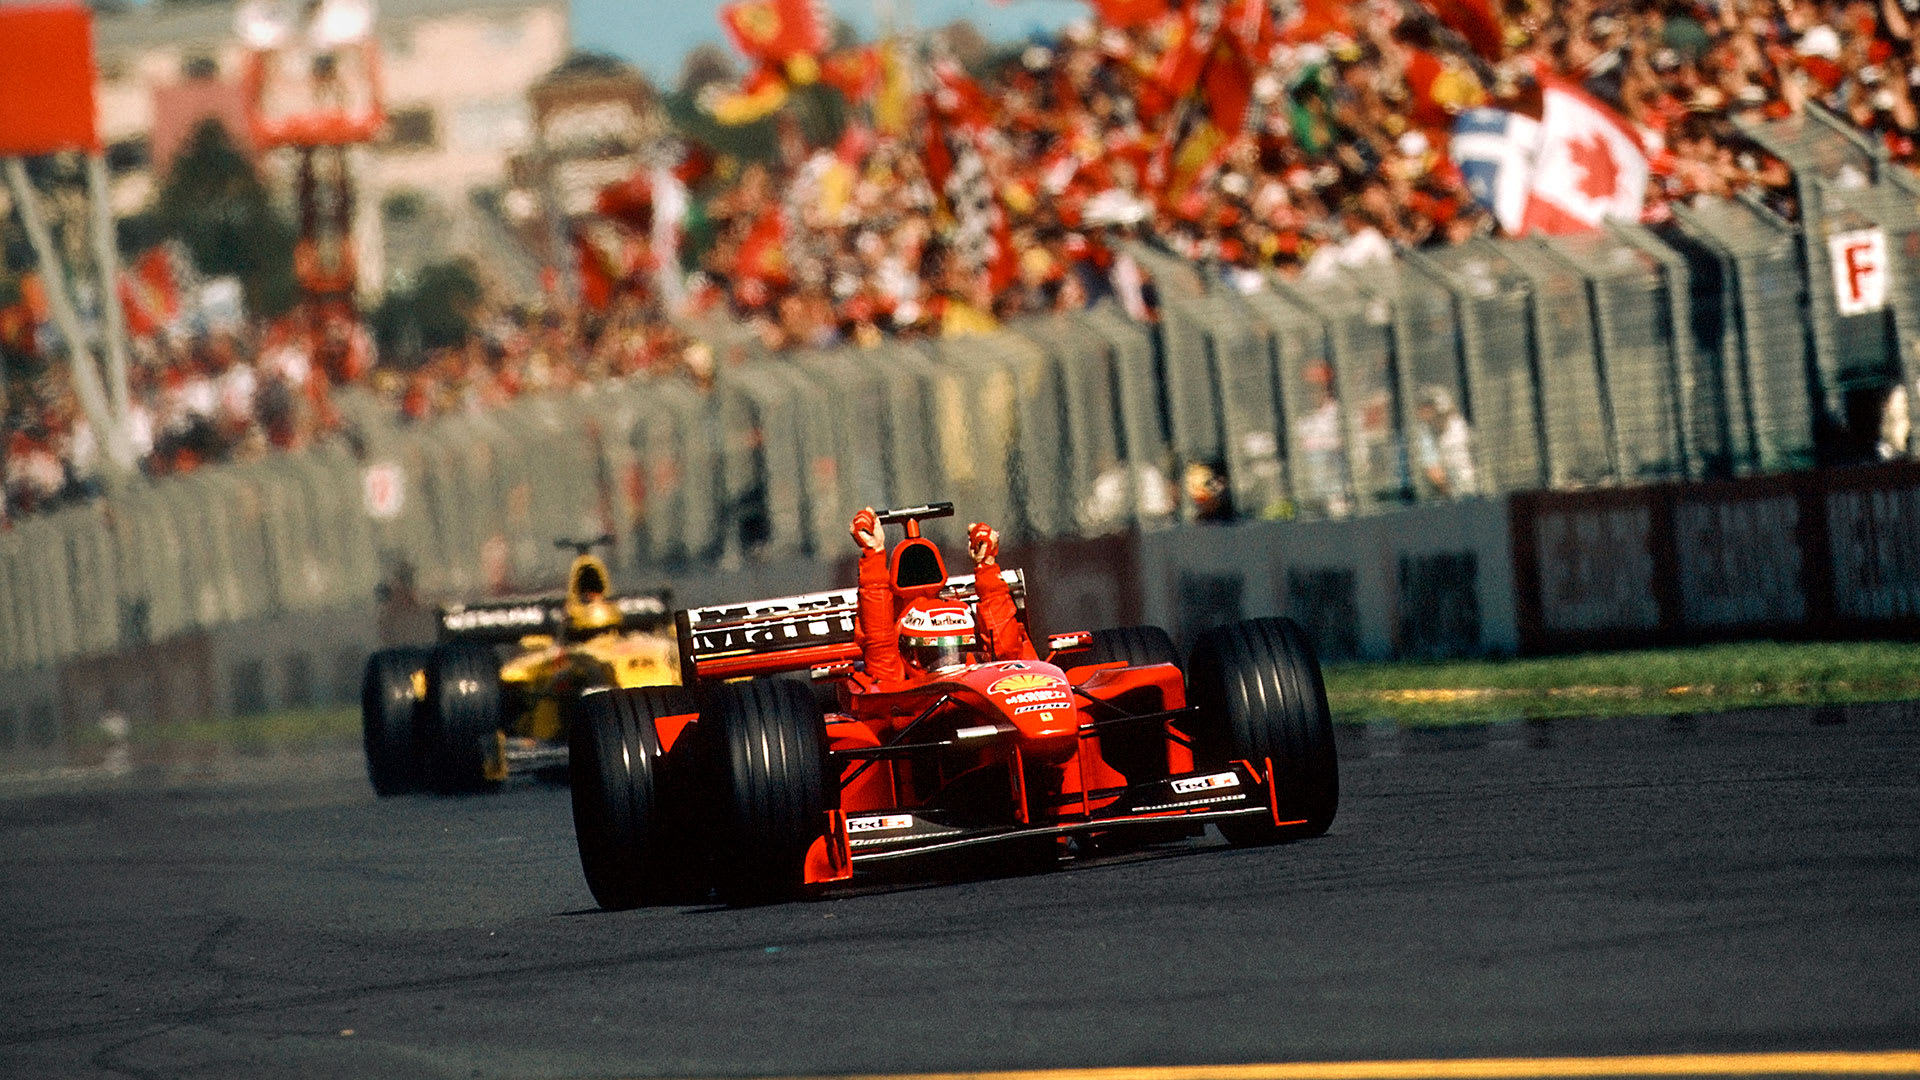 Watch Old F1 Races Flash Sales, SAVE 30%